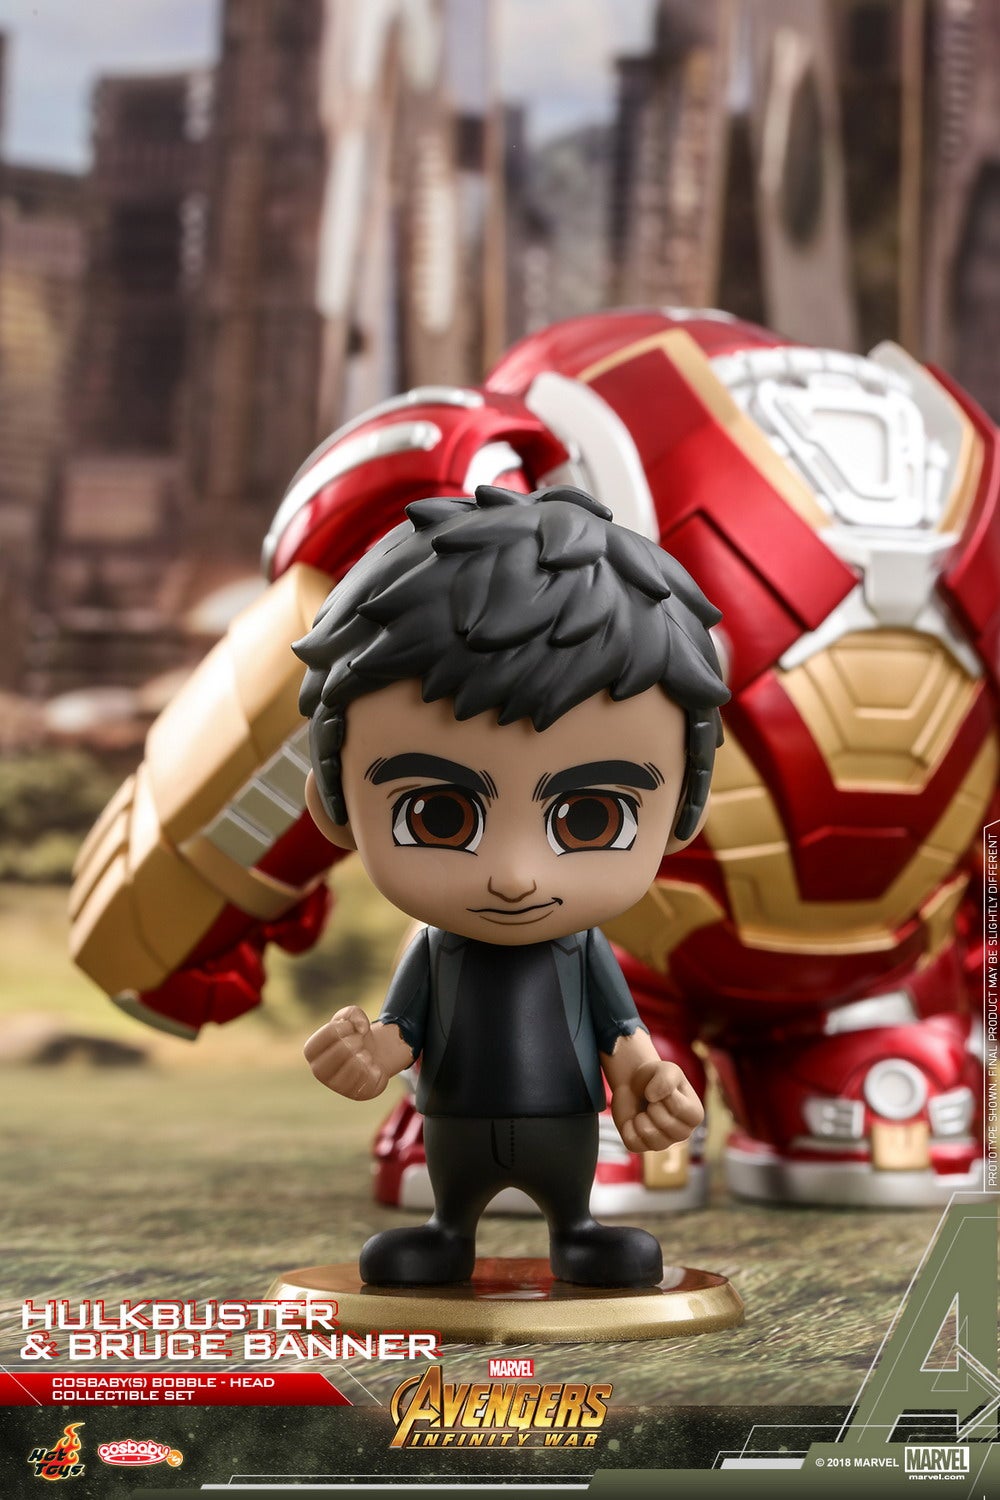 MORE Hot Toys Avengers: Infinity War Cosbaby Bobble-Heads 